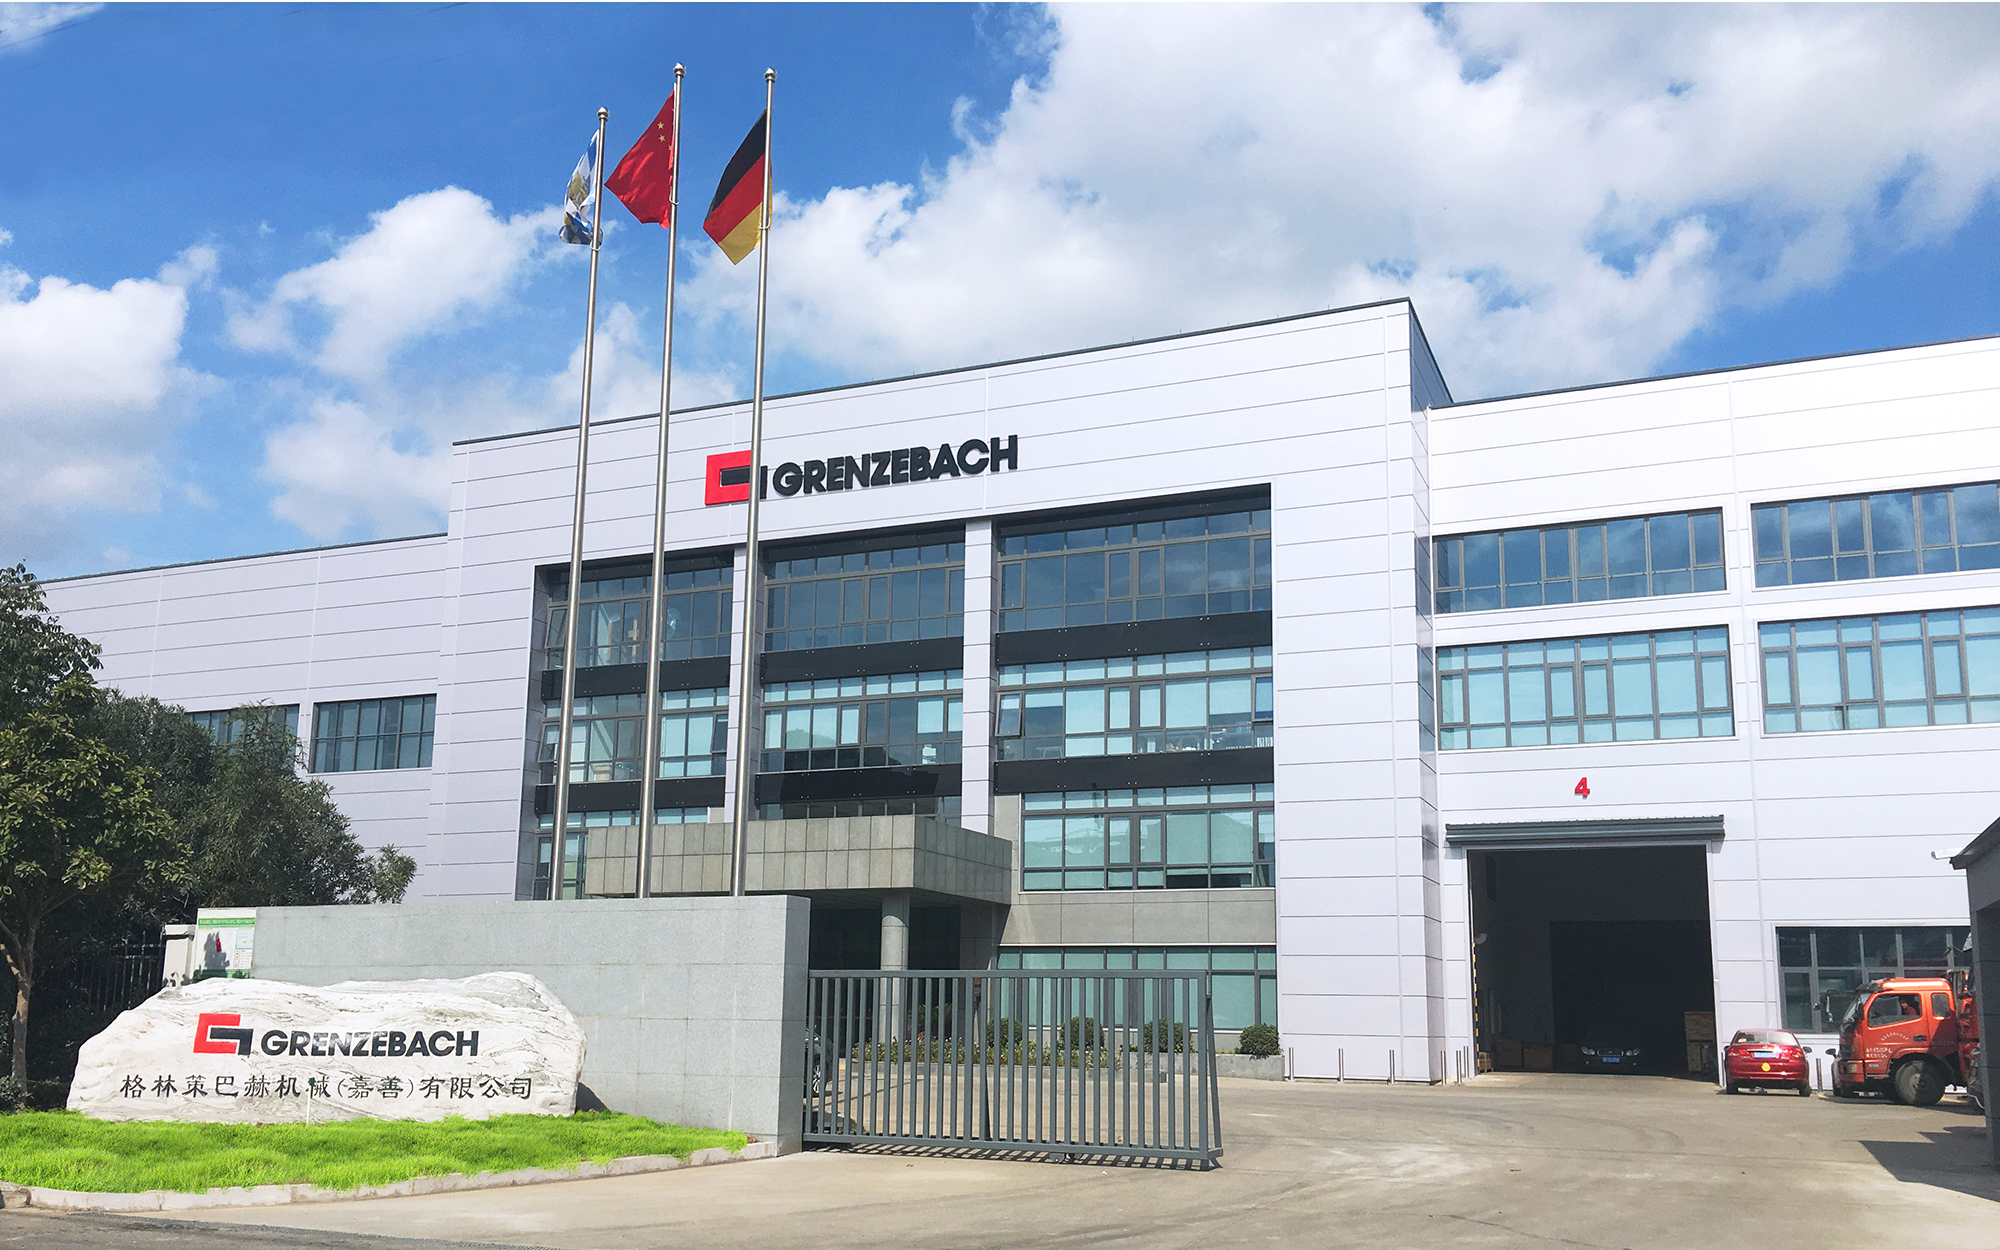 220  employees work at the Grenzebach sites in Shanghai and Jiashan